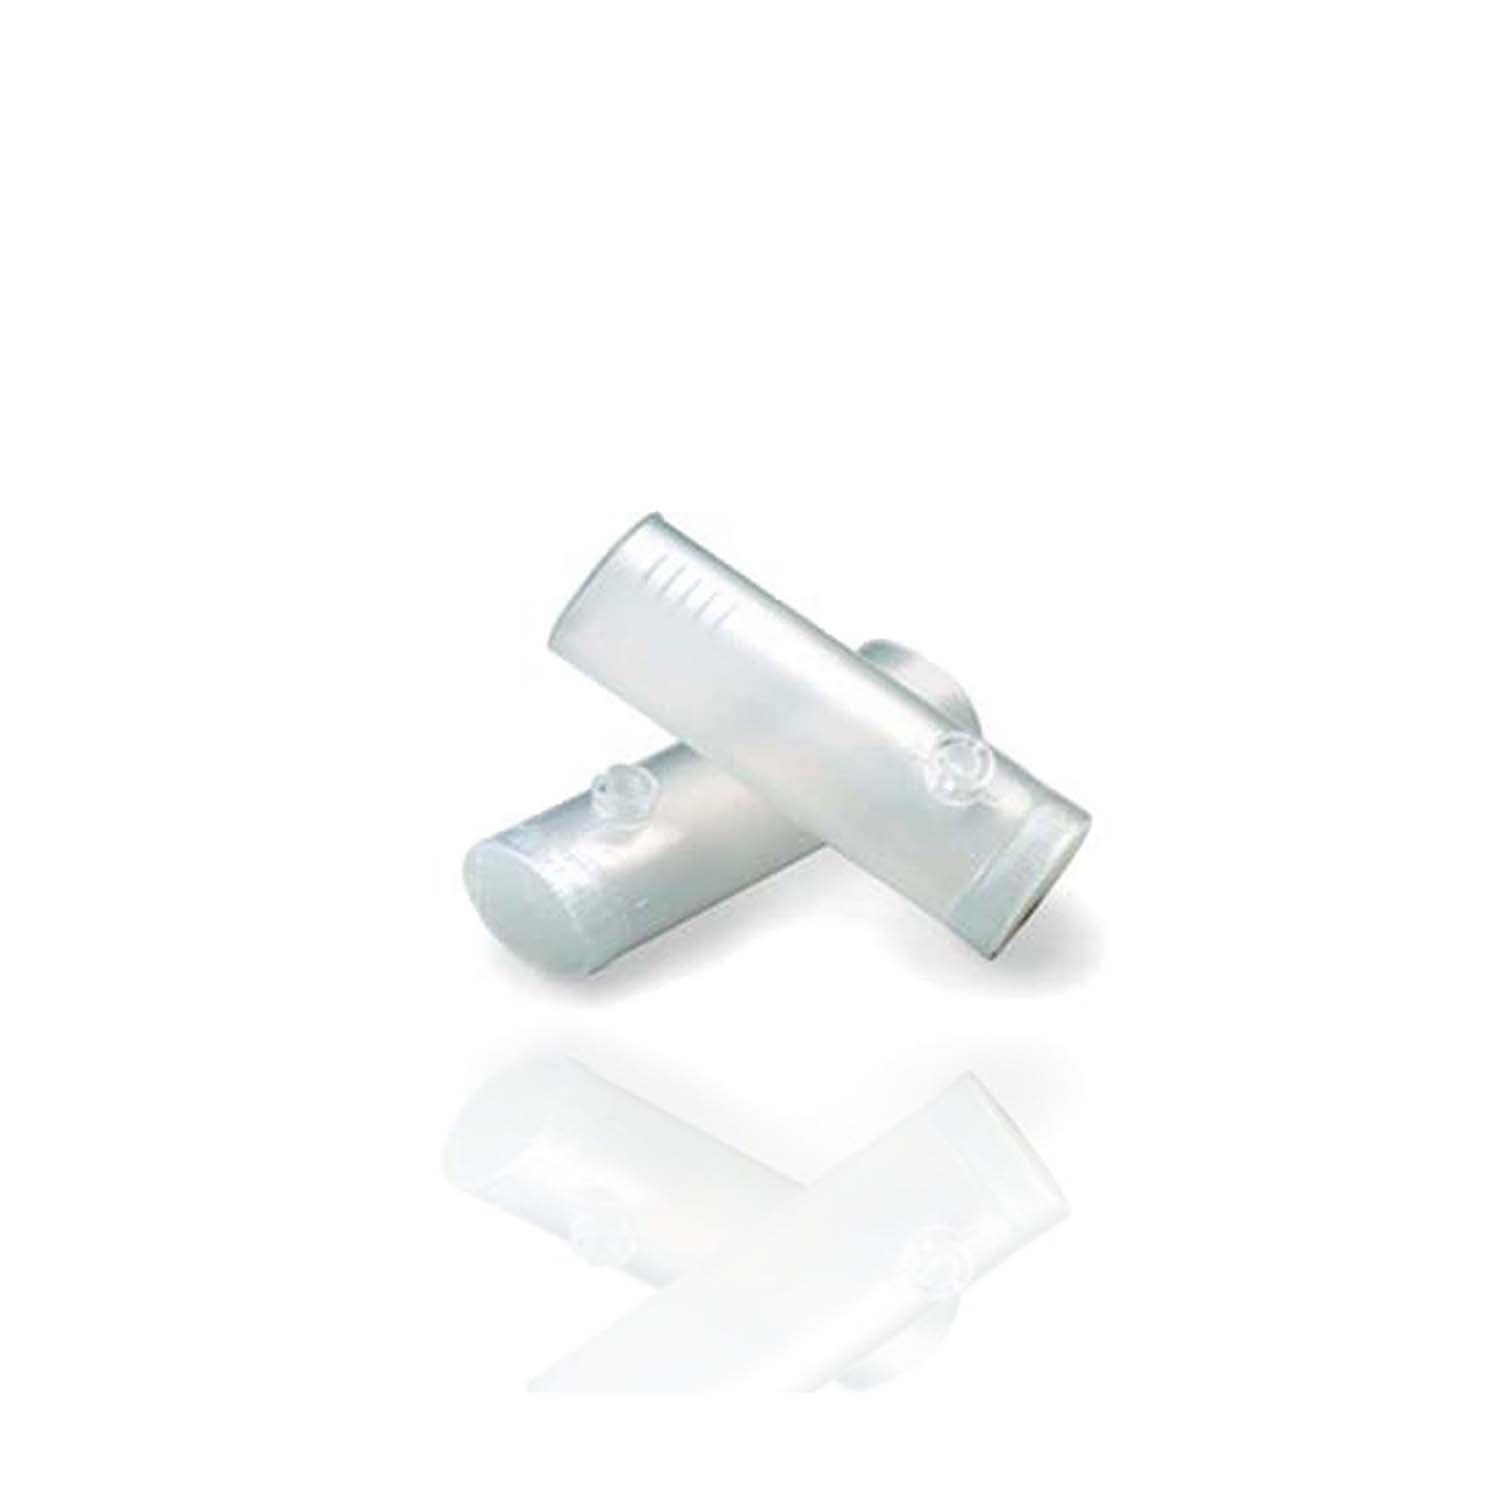 One Way Valve Mouthpieces Inspiratory Clement Clarke - McArthur